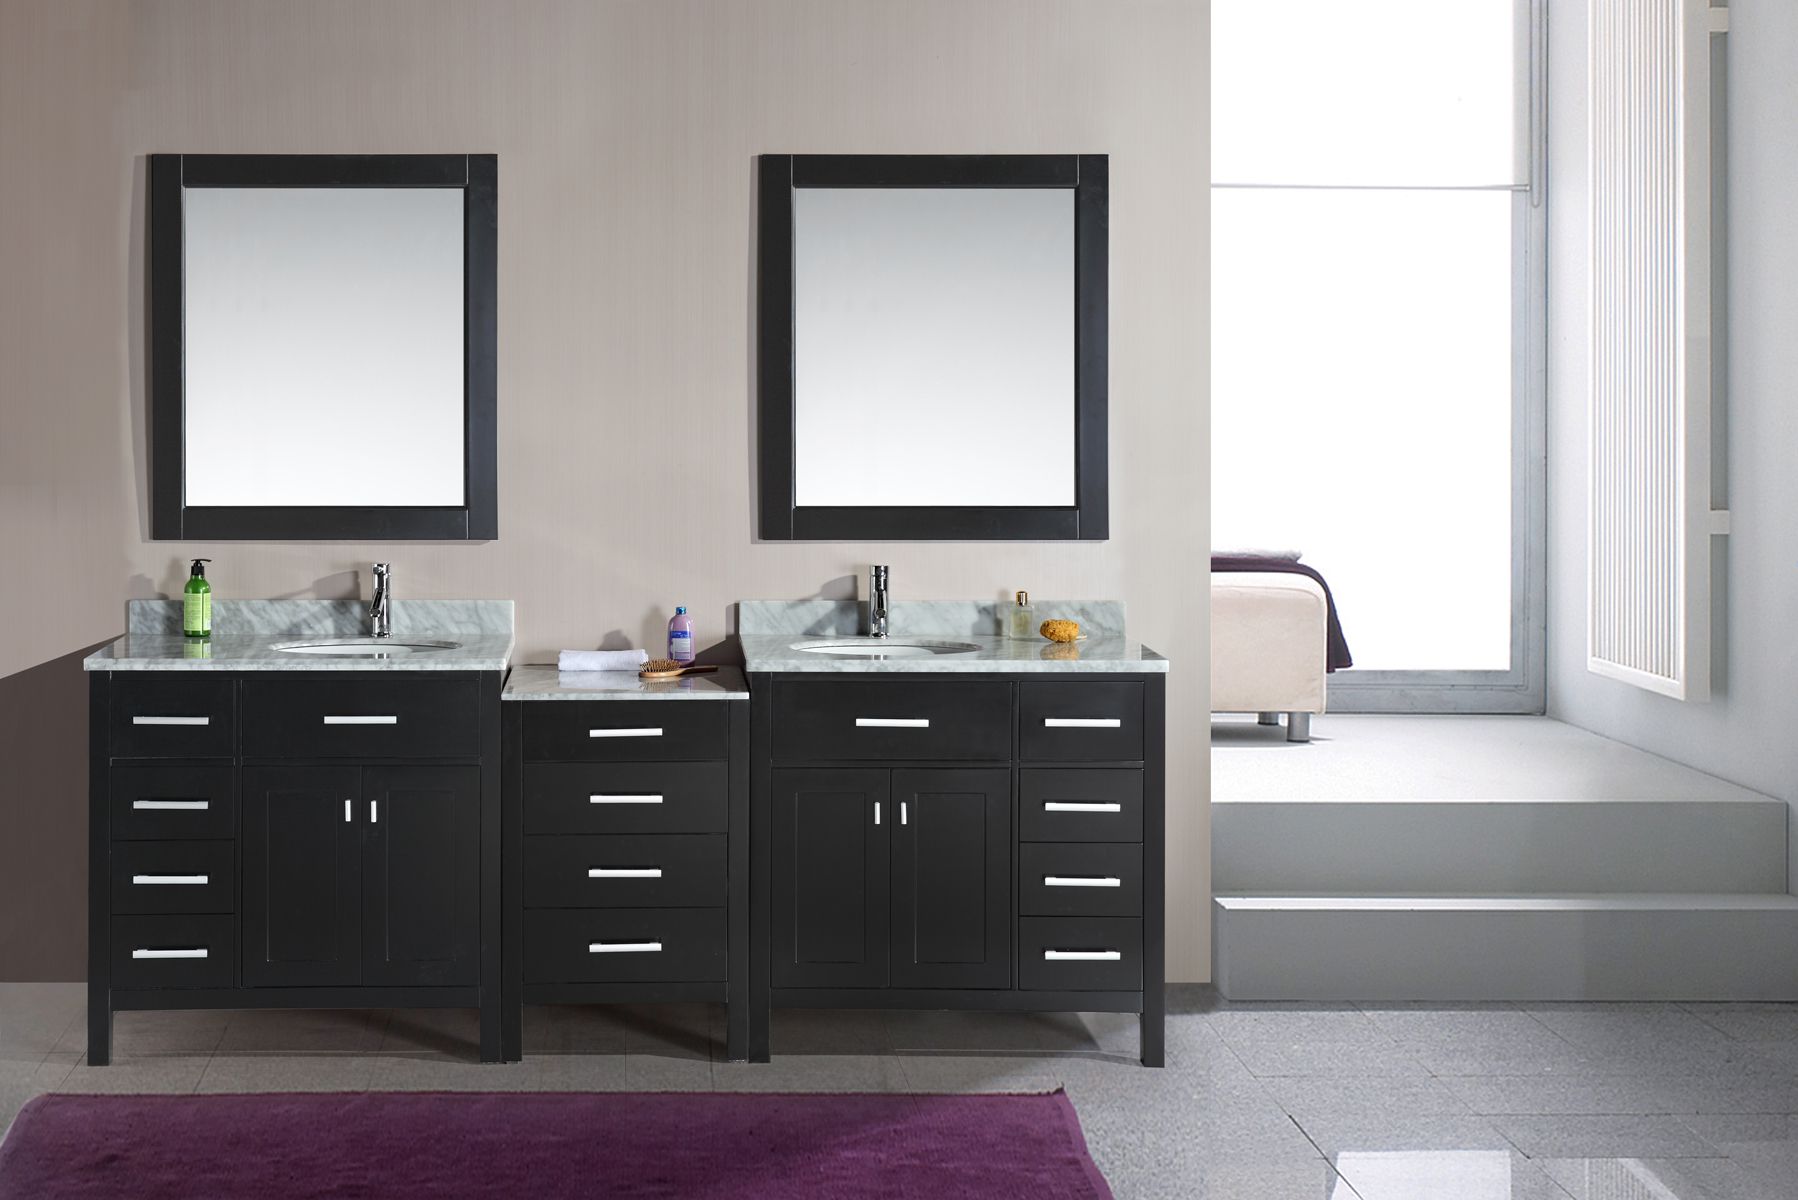 Double Sink With Natty Double Sink Vanity London With Square Mirrors And Purple Shag Rug Bathroom Double Sink Vanity Application For Spacious Bathroom Design